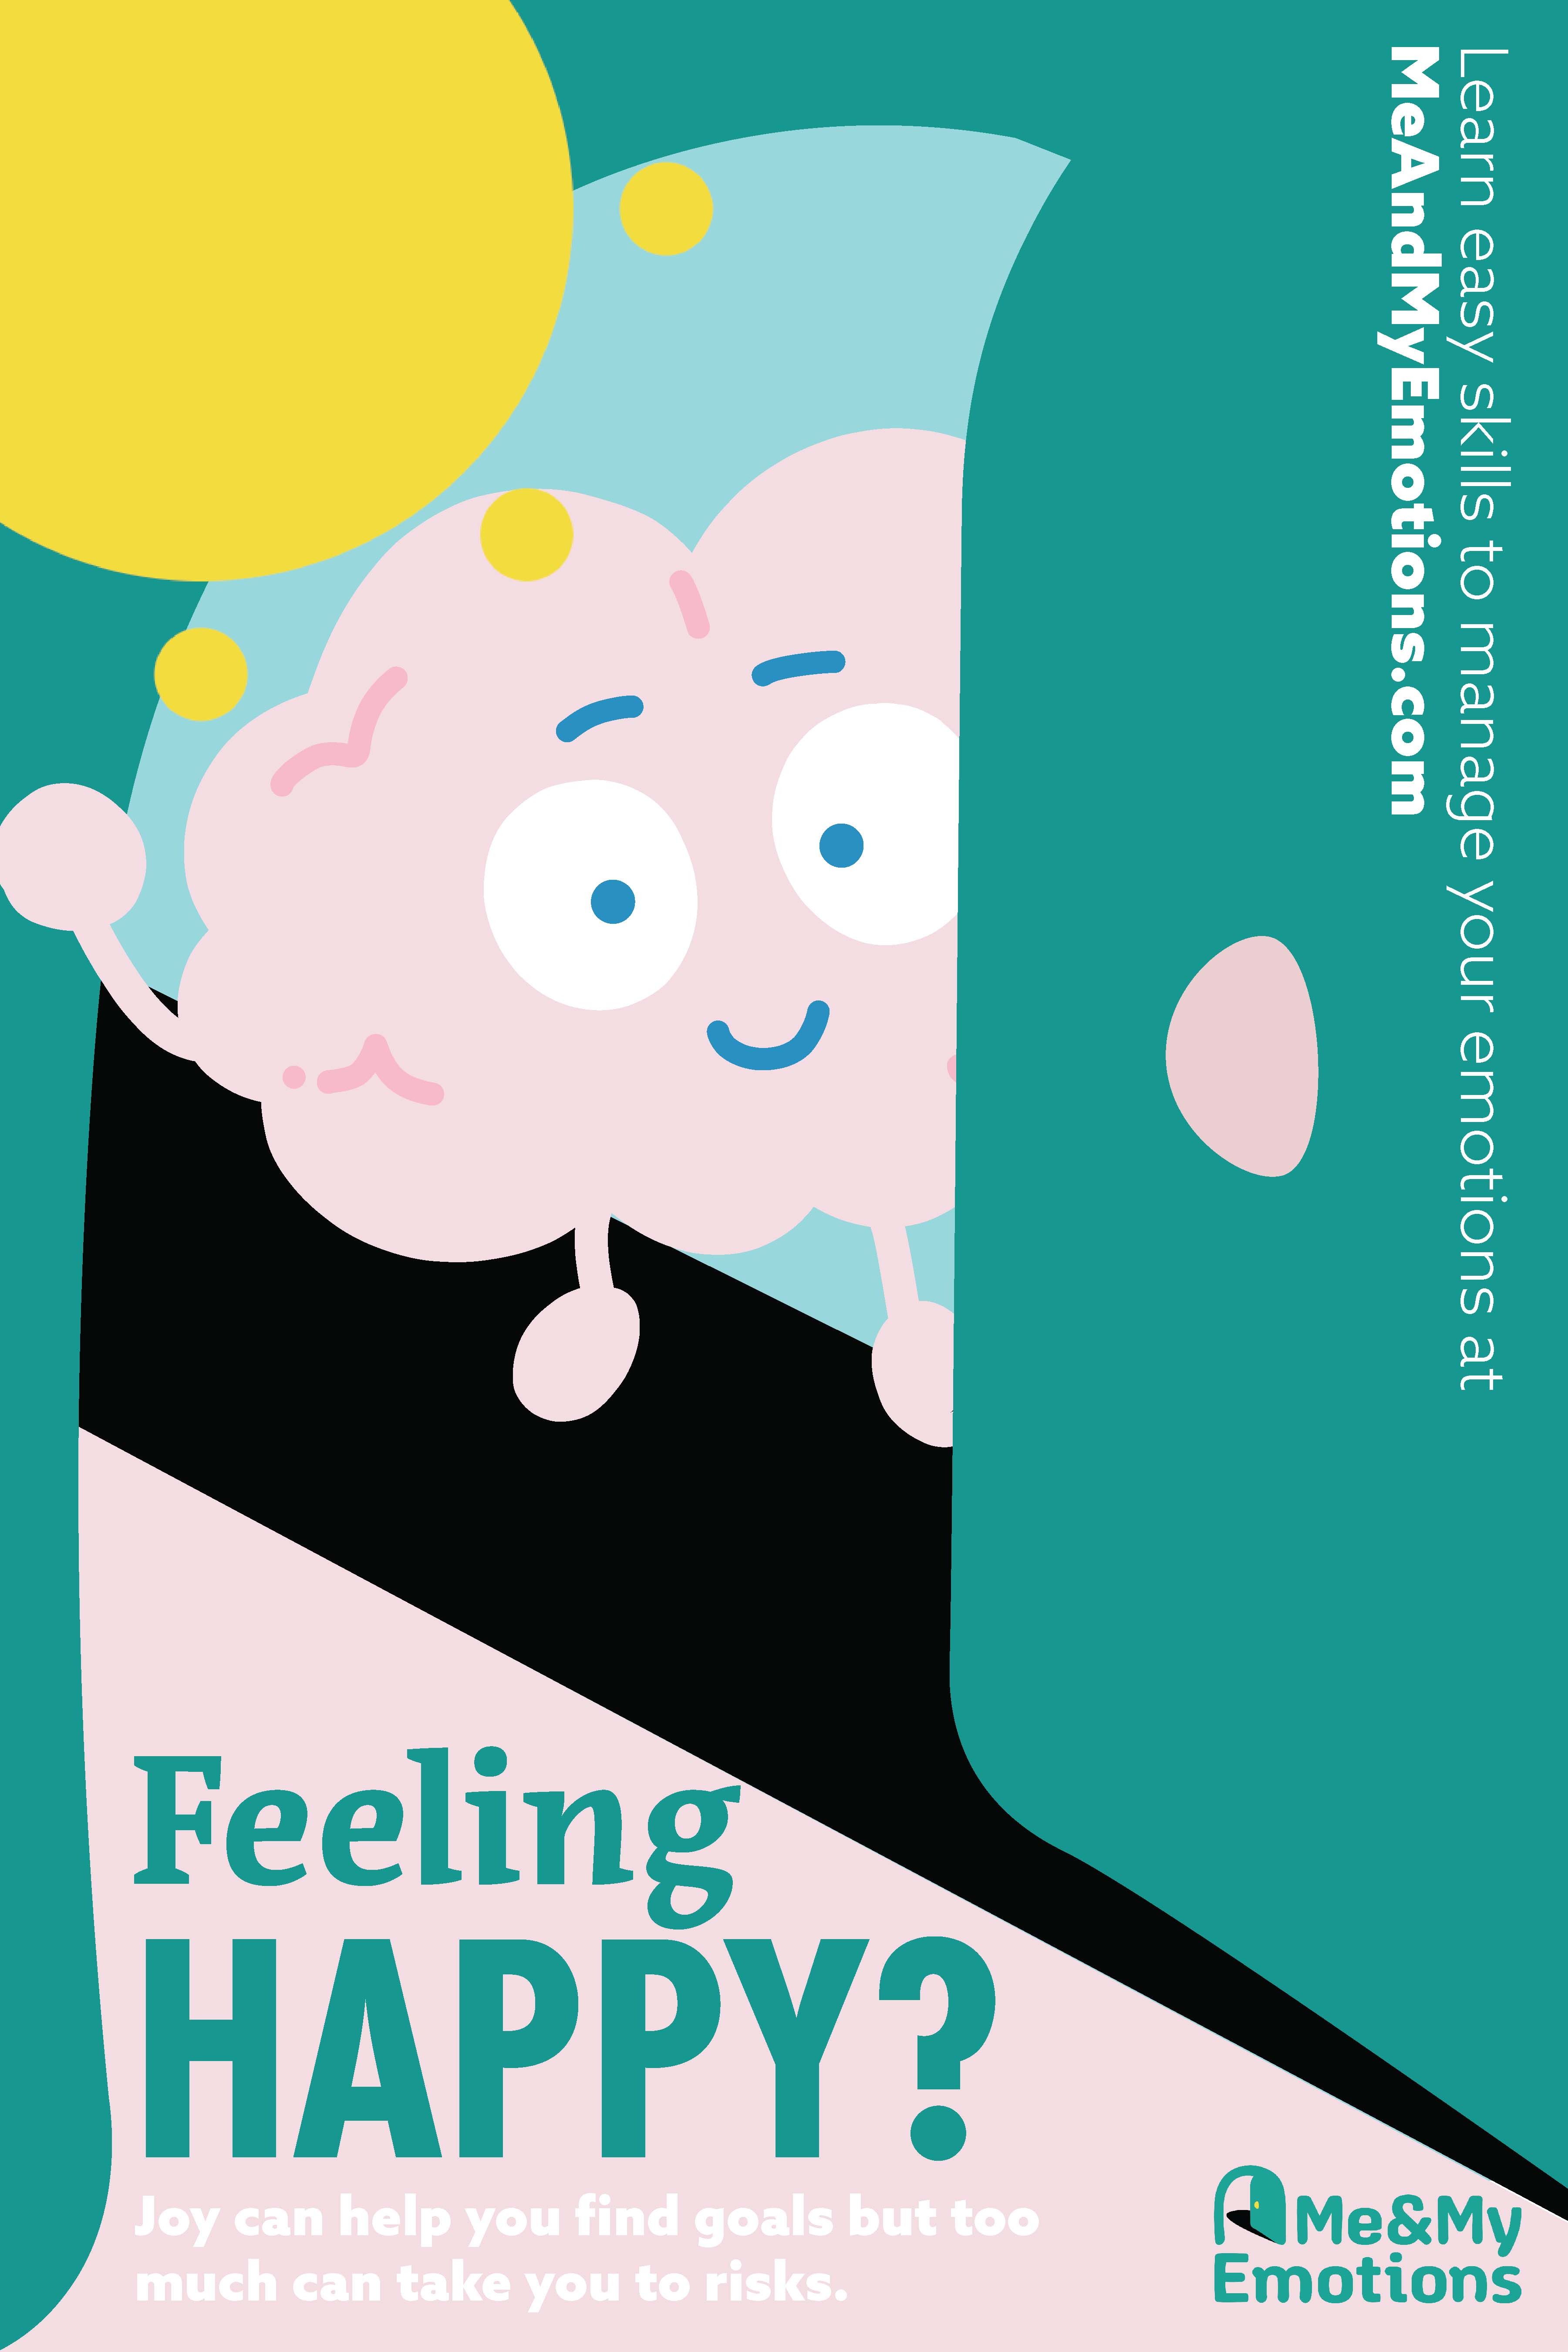 Image from the Me and My Emotions campaign designed by ArtCenter students for a Designmatters class and implemented by a nonprofit partner to help teens with mental wellbeing.